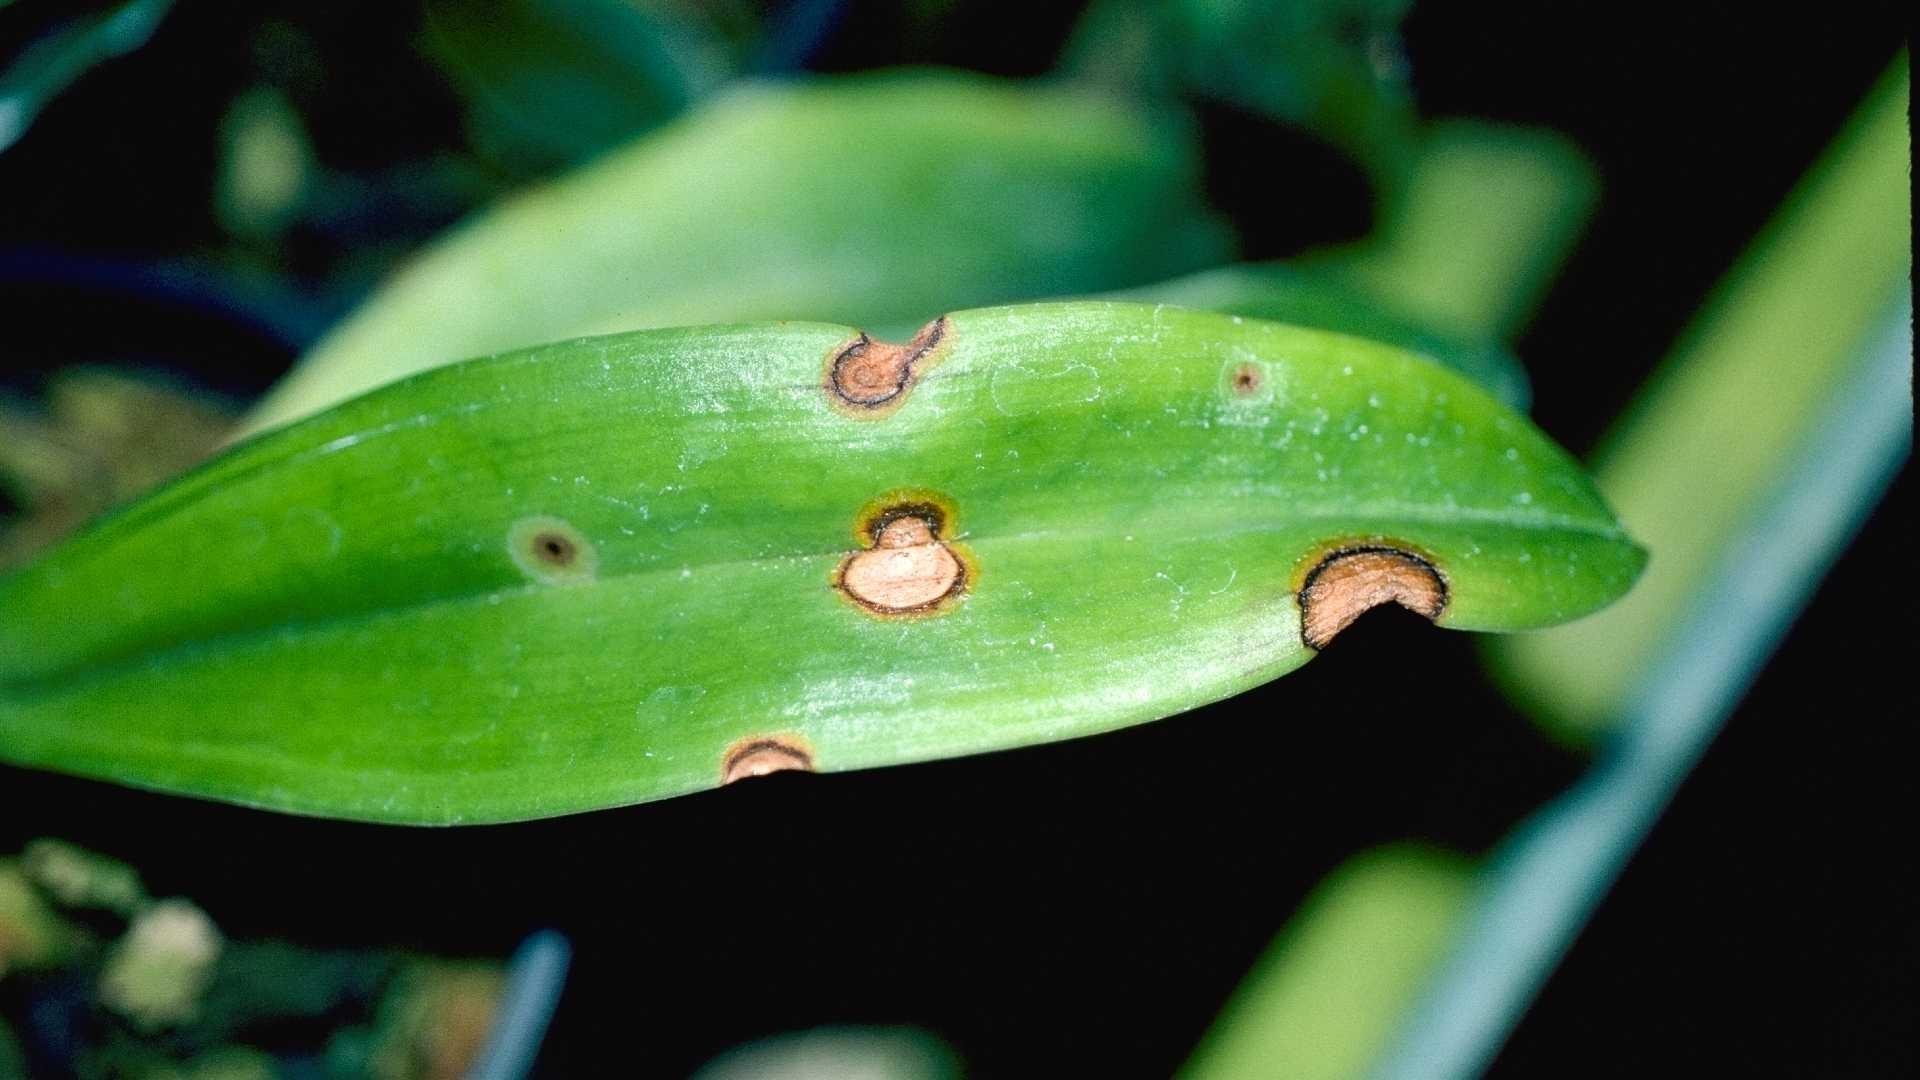 Leafspots on orchid leaves